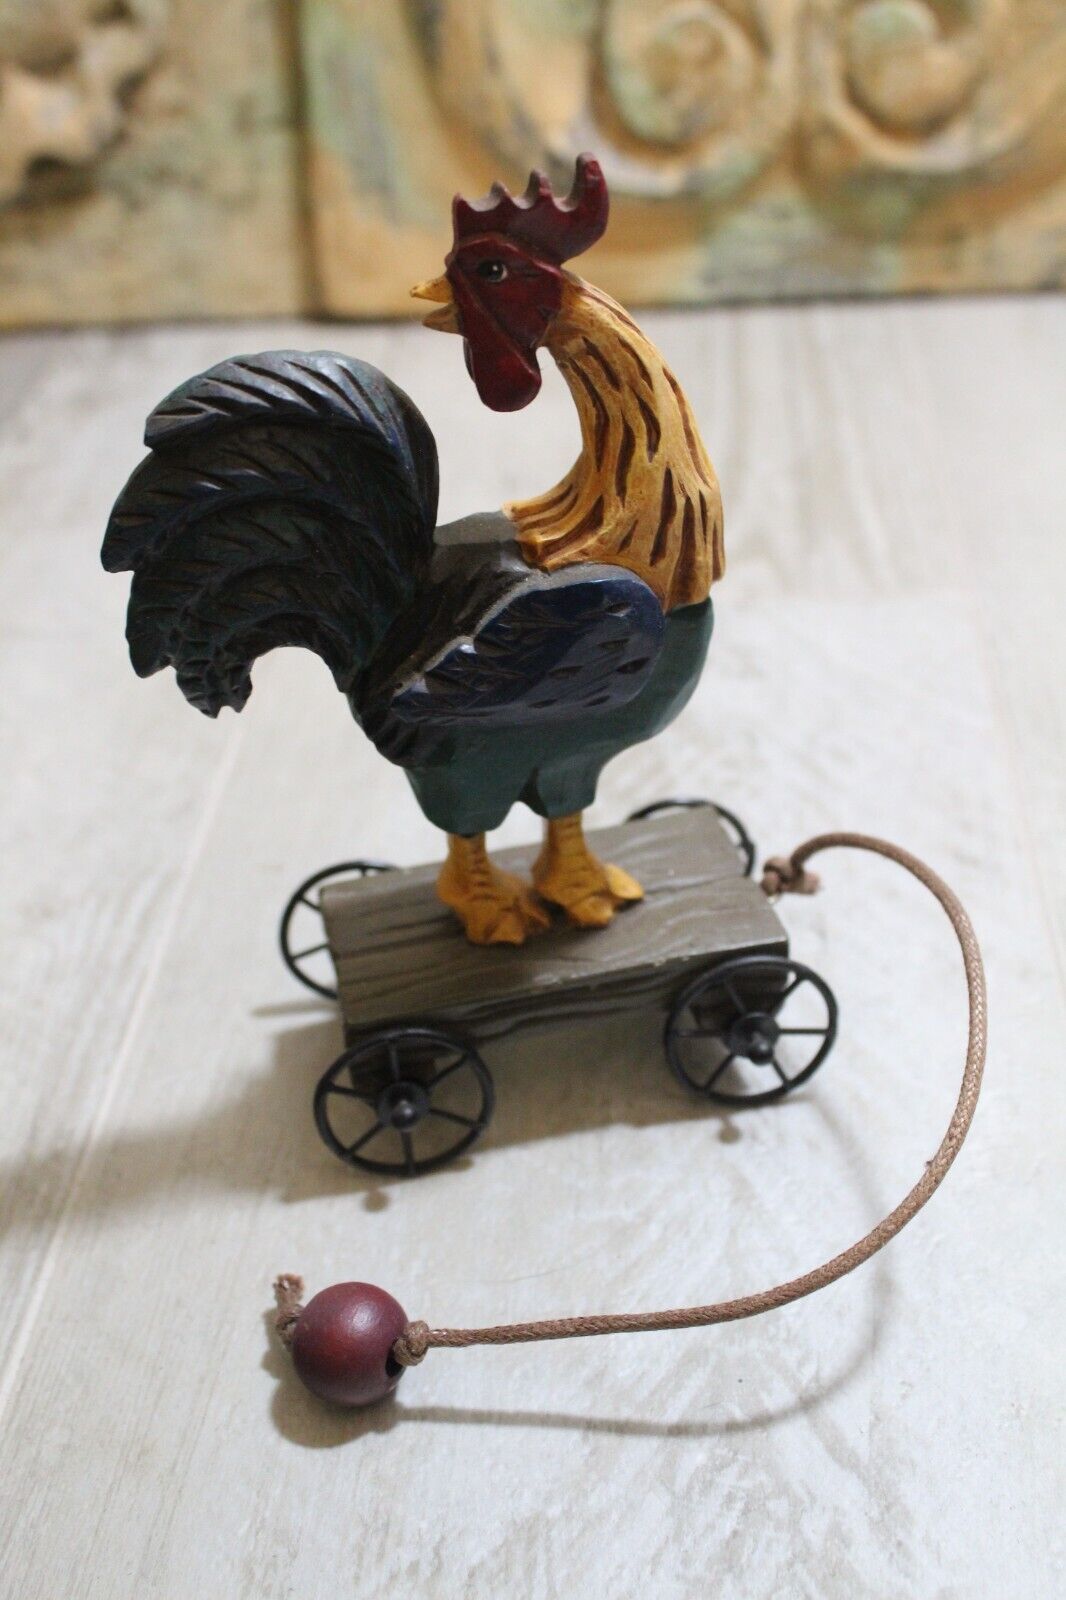 Vintage David Frykman “The Barnyard” Rooster Riding On Wagon Figurine 5.5in